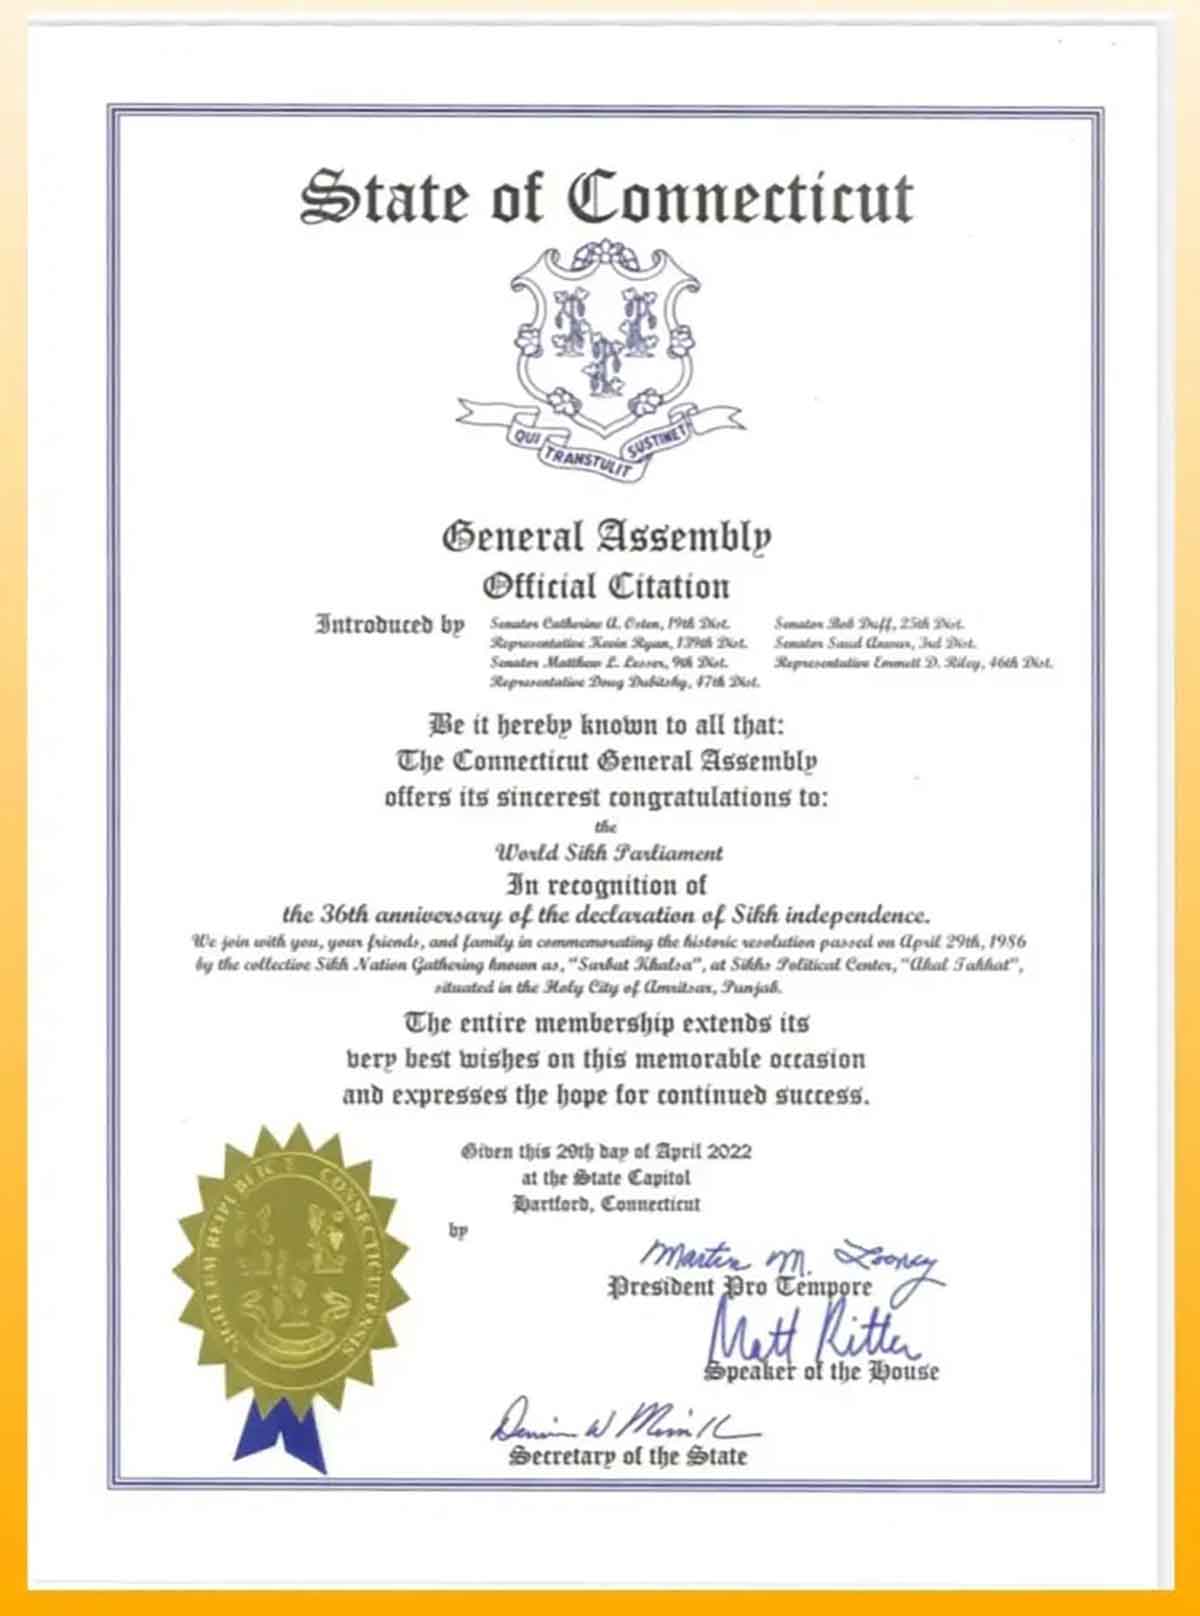 Screengrab of the citation by the General Assembly of the State of Connecticut